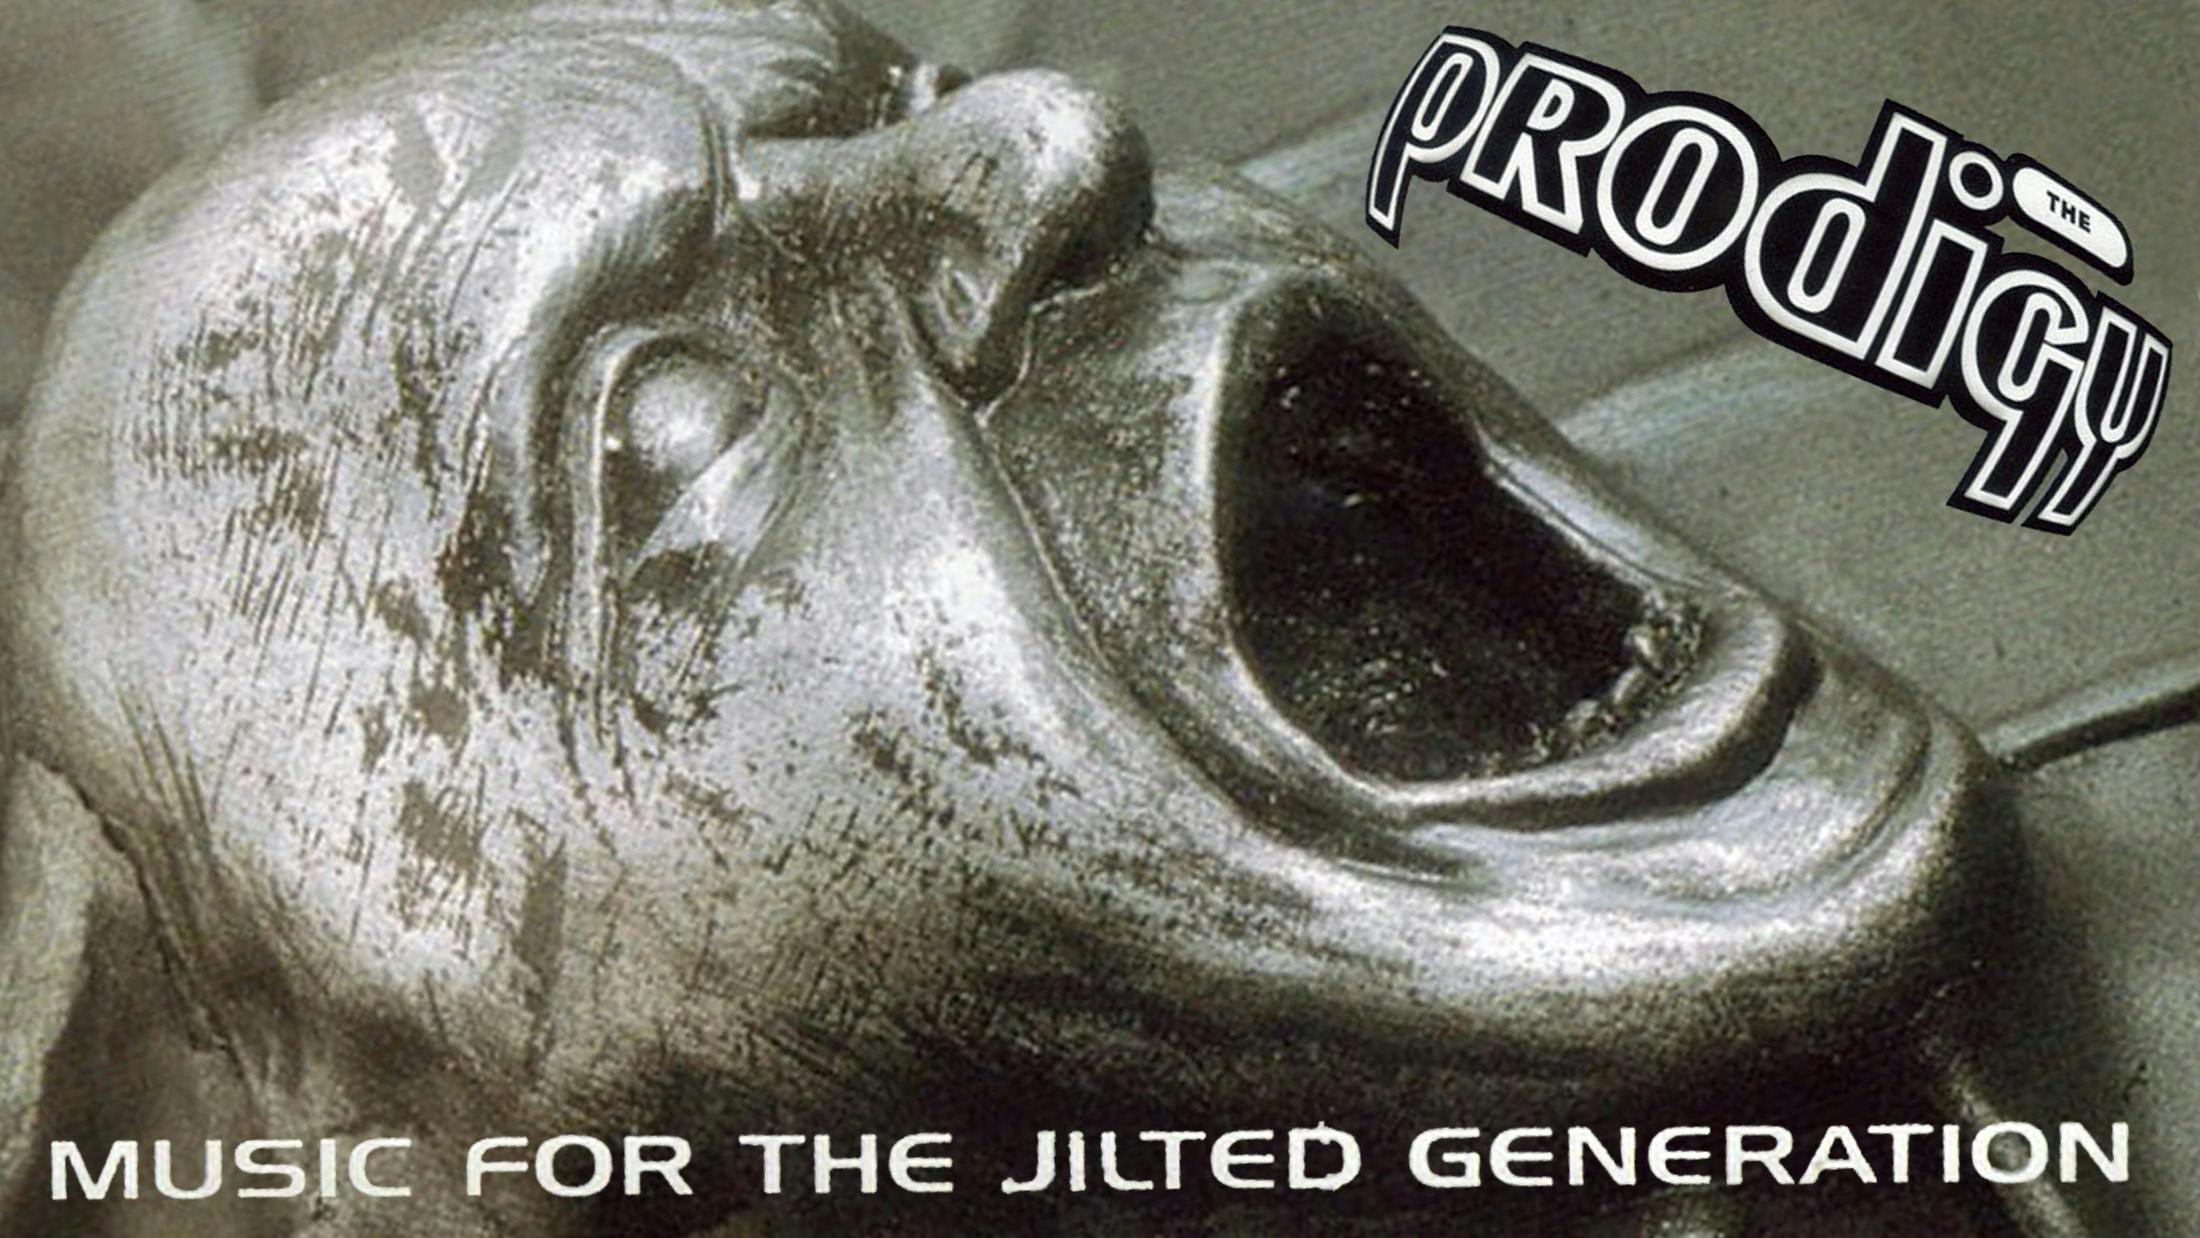 Music for the jilted generation. Prodigy jilted Generation. Music for the jilted Generation the Prodigy. 1994 - Music for the jilted Generation. The Prodigy Music for the jilted.